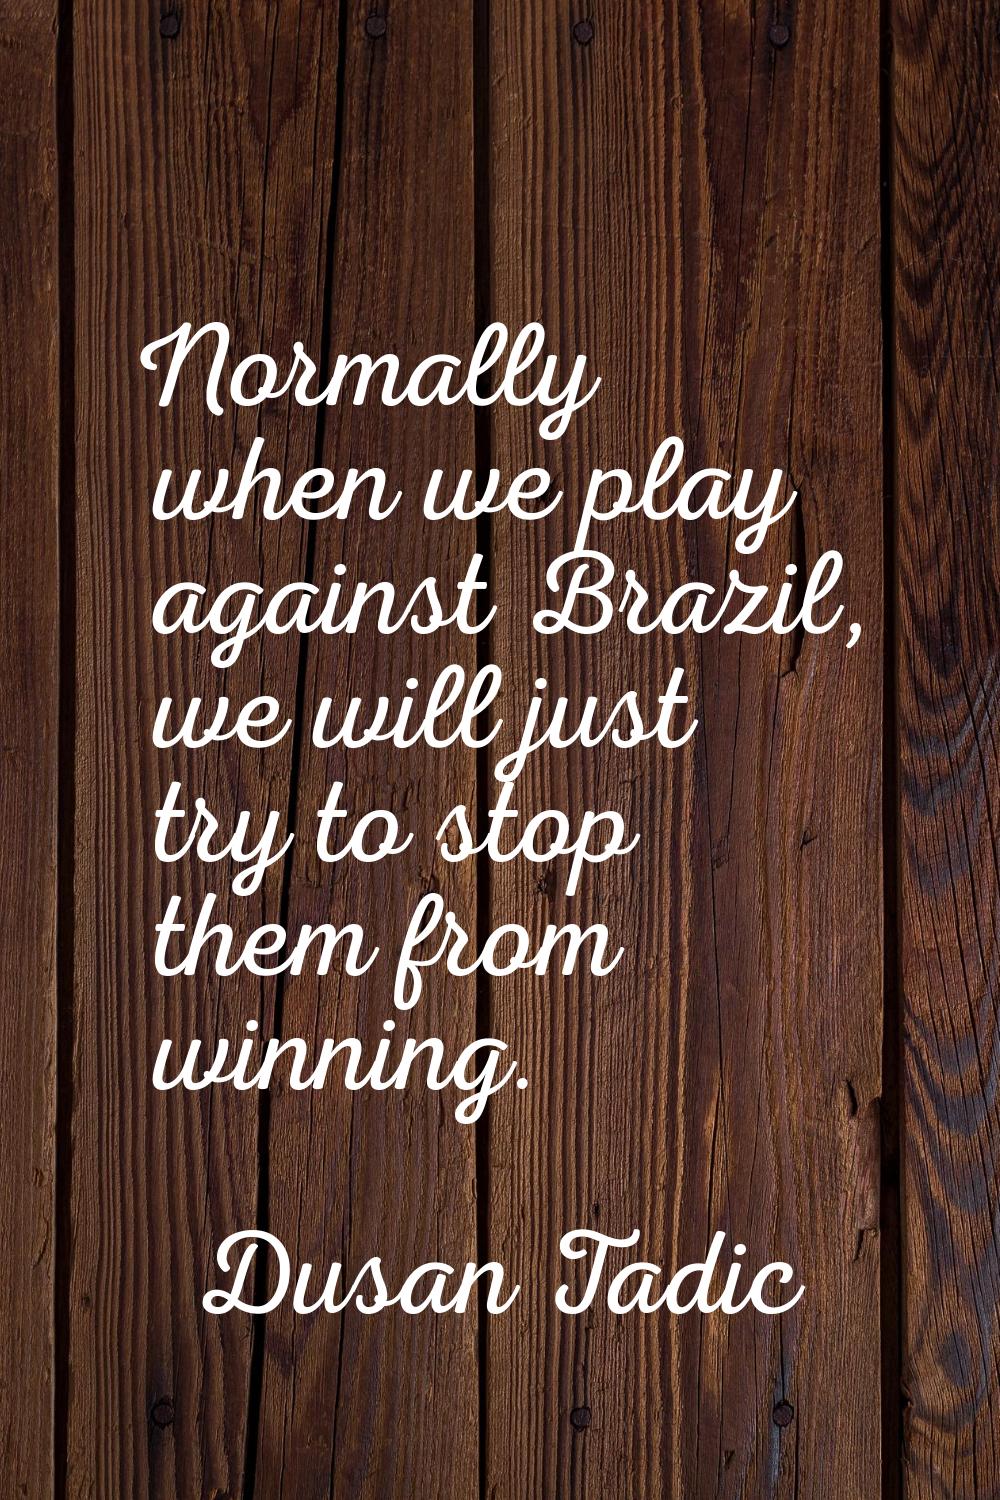 Normally when we play against Brazil, we will just try to stop them from winning.